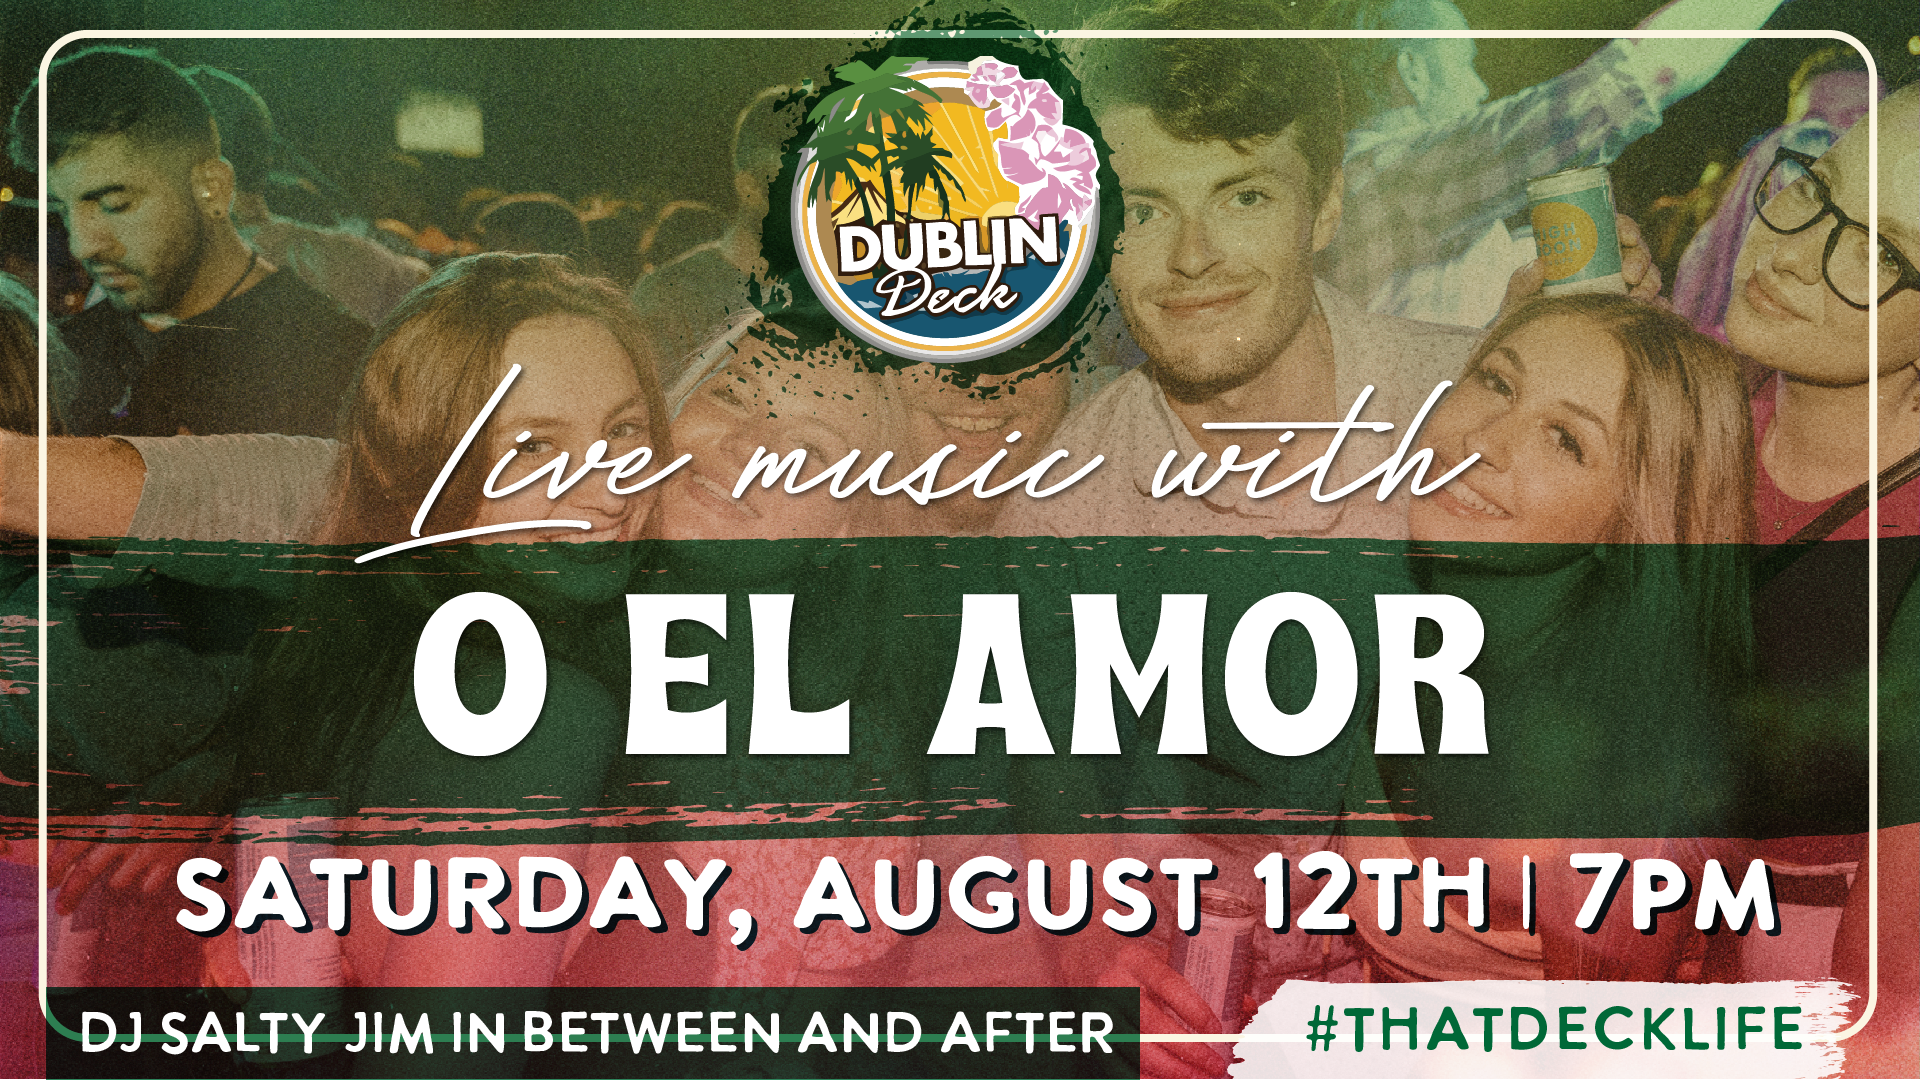 Jam out with O El Amor at Dublin Deck! Music begins at 7PM